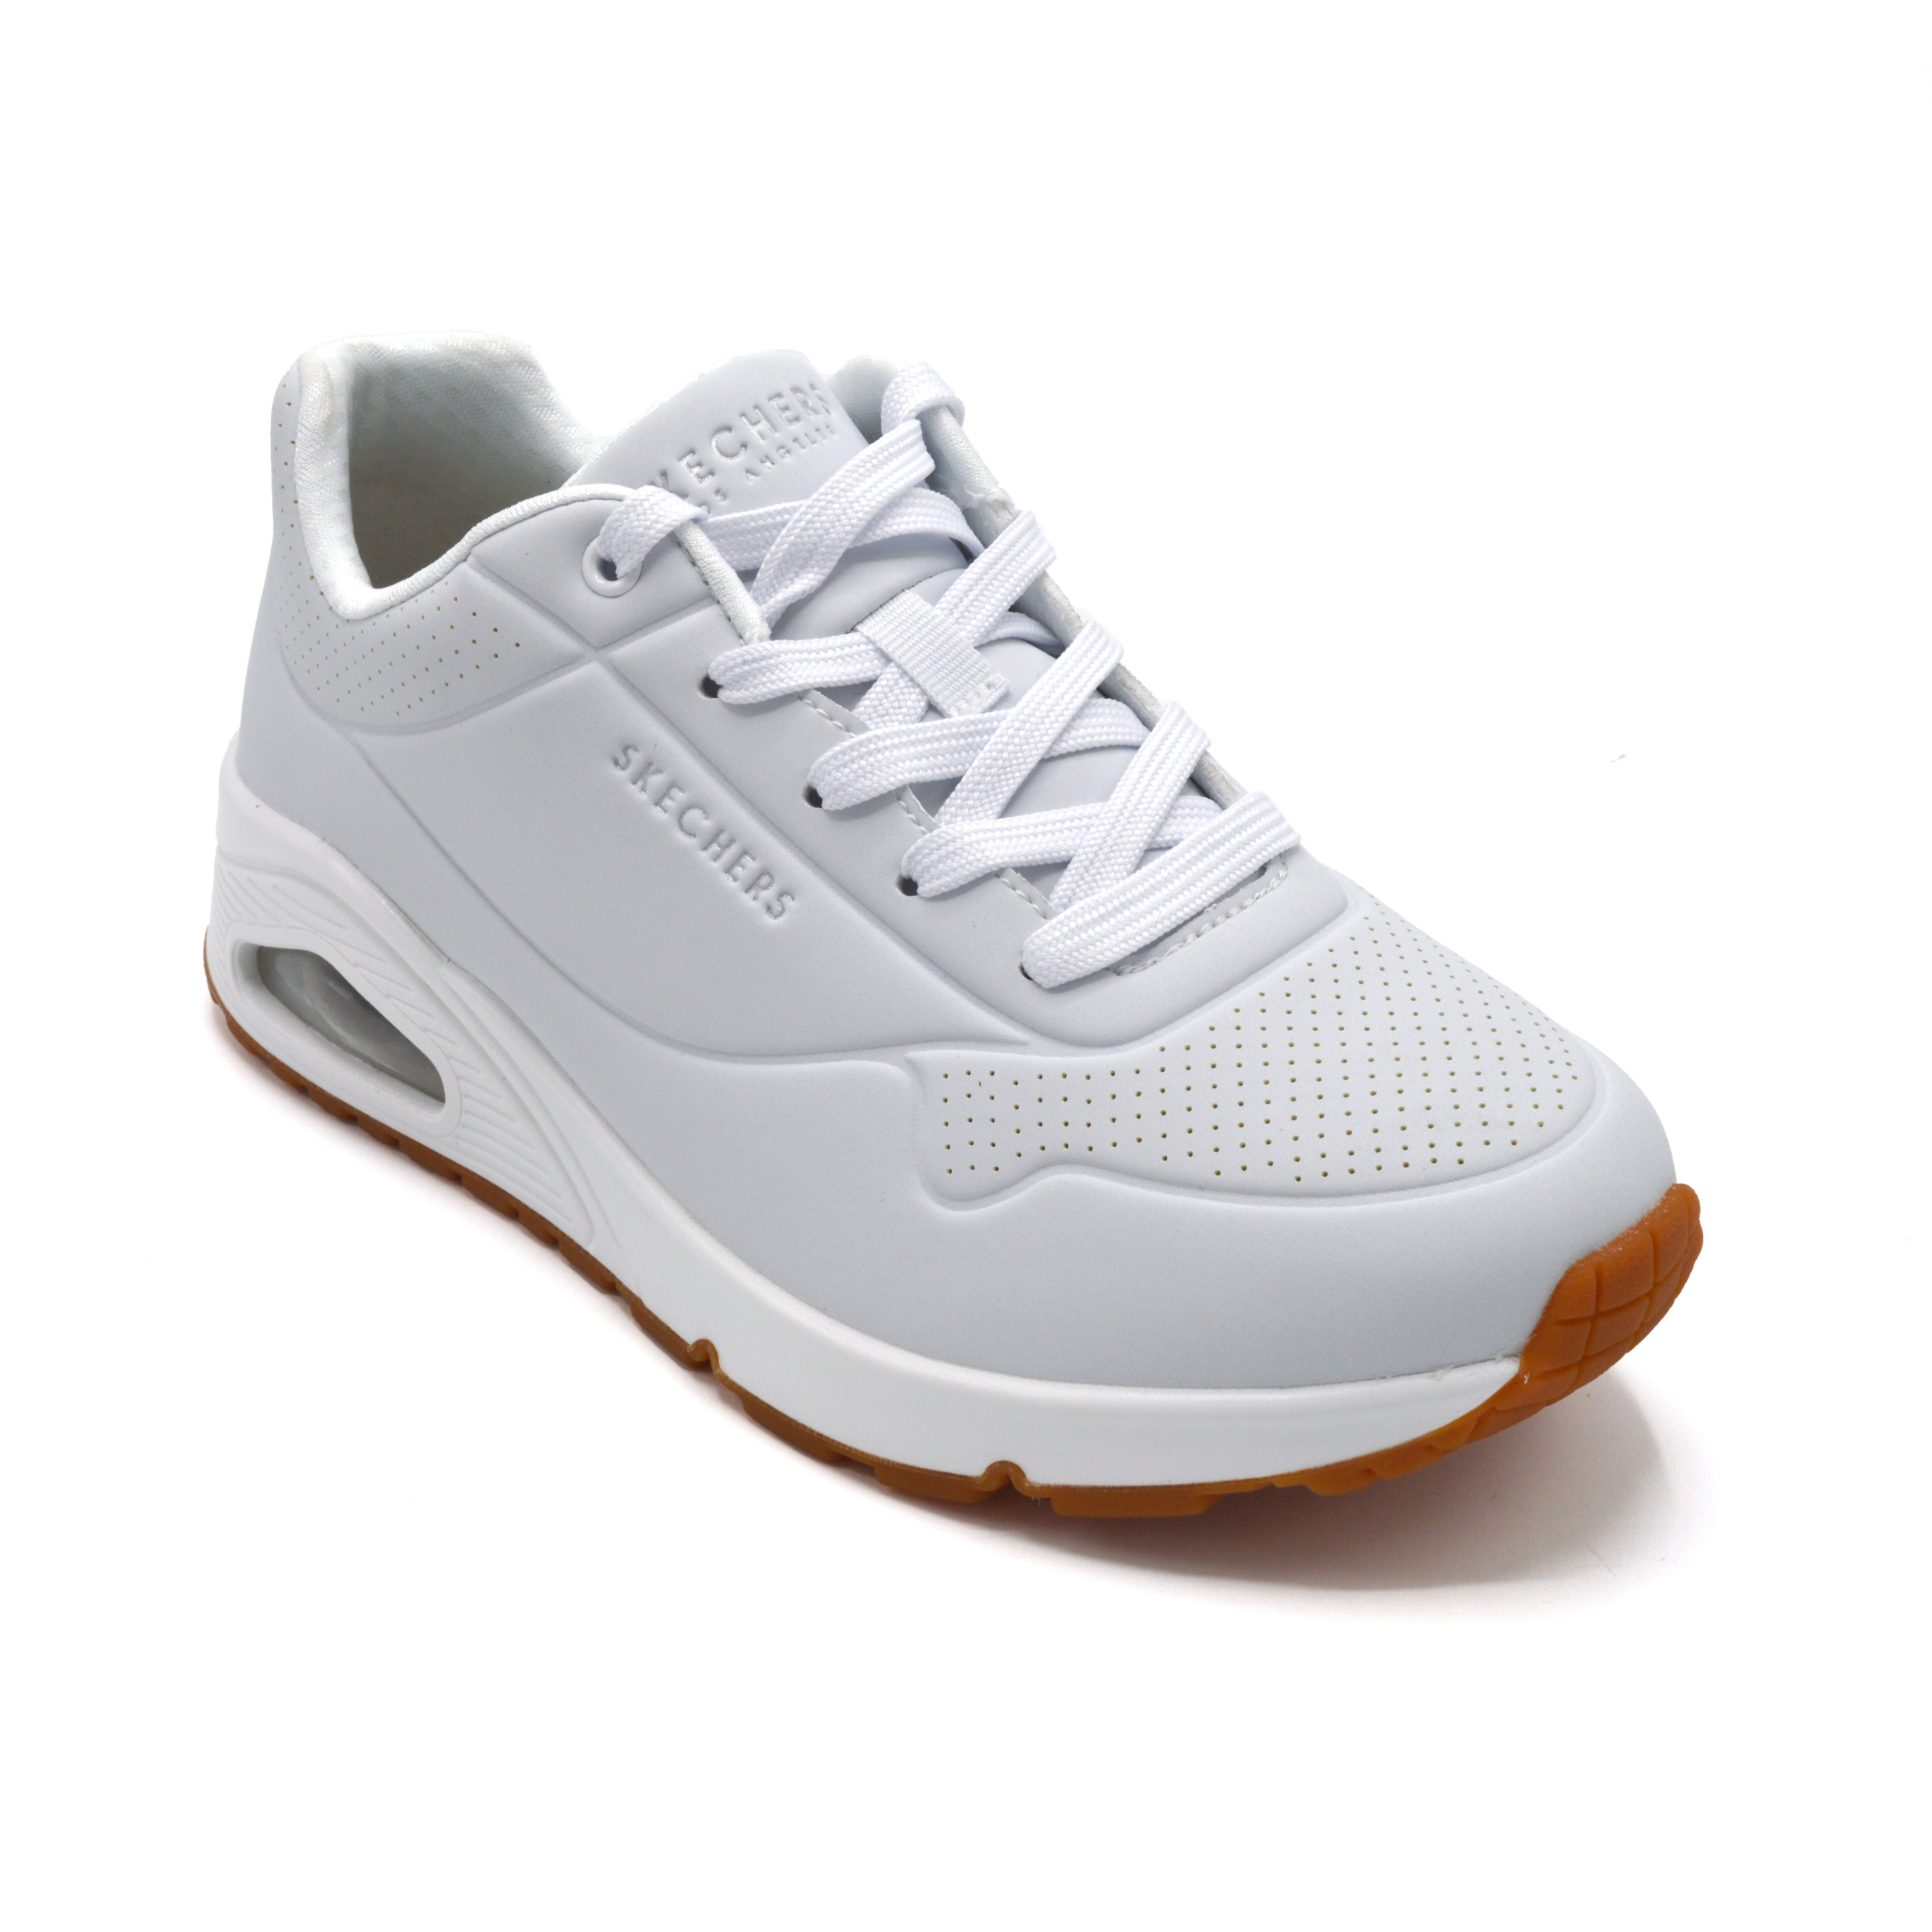 Skechers Uno Stand On Air - Ladies Wide Fit Summer Trainer - 2E Fitting - White